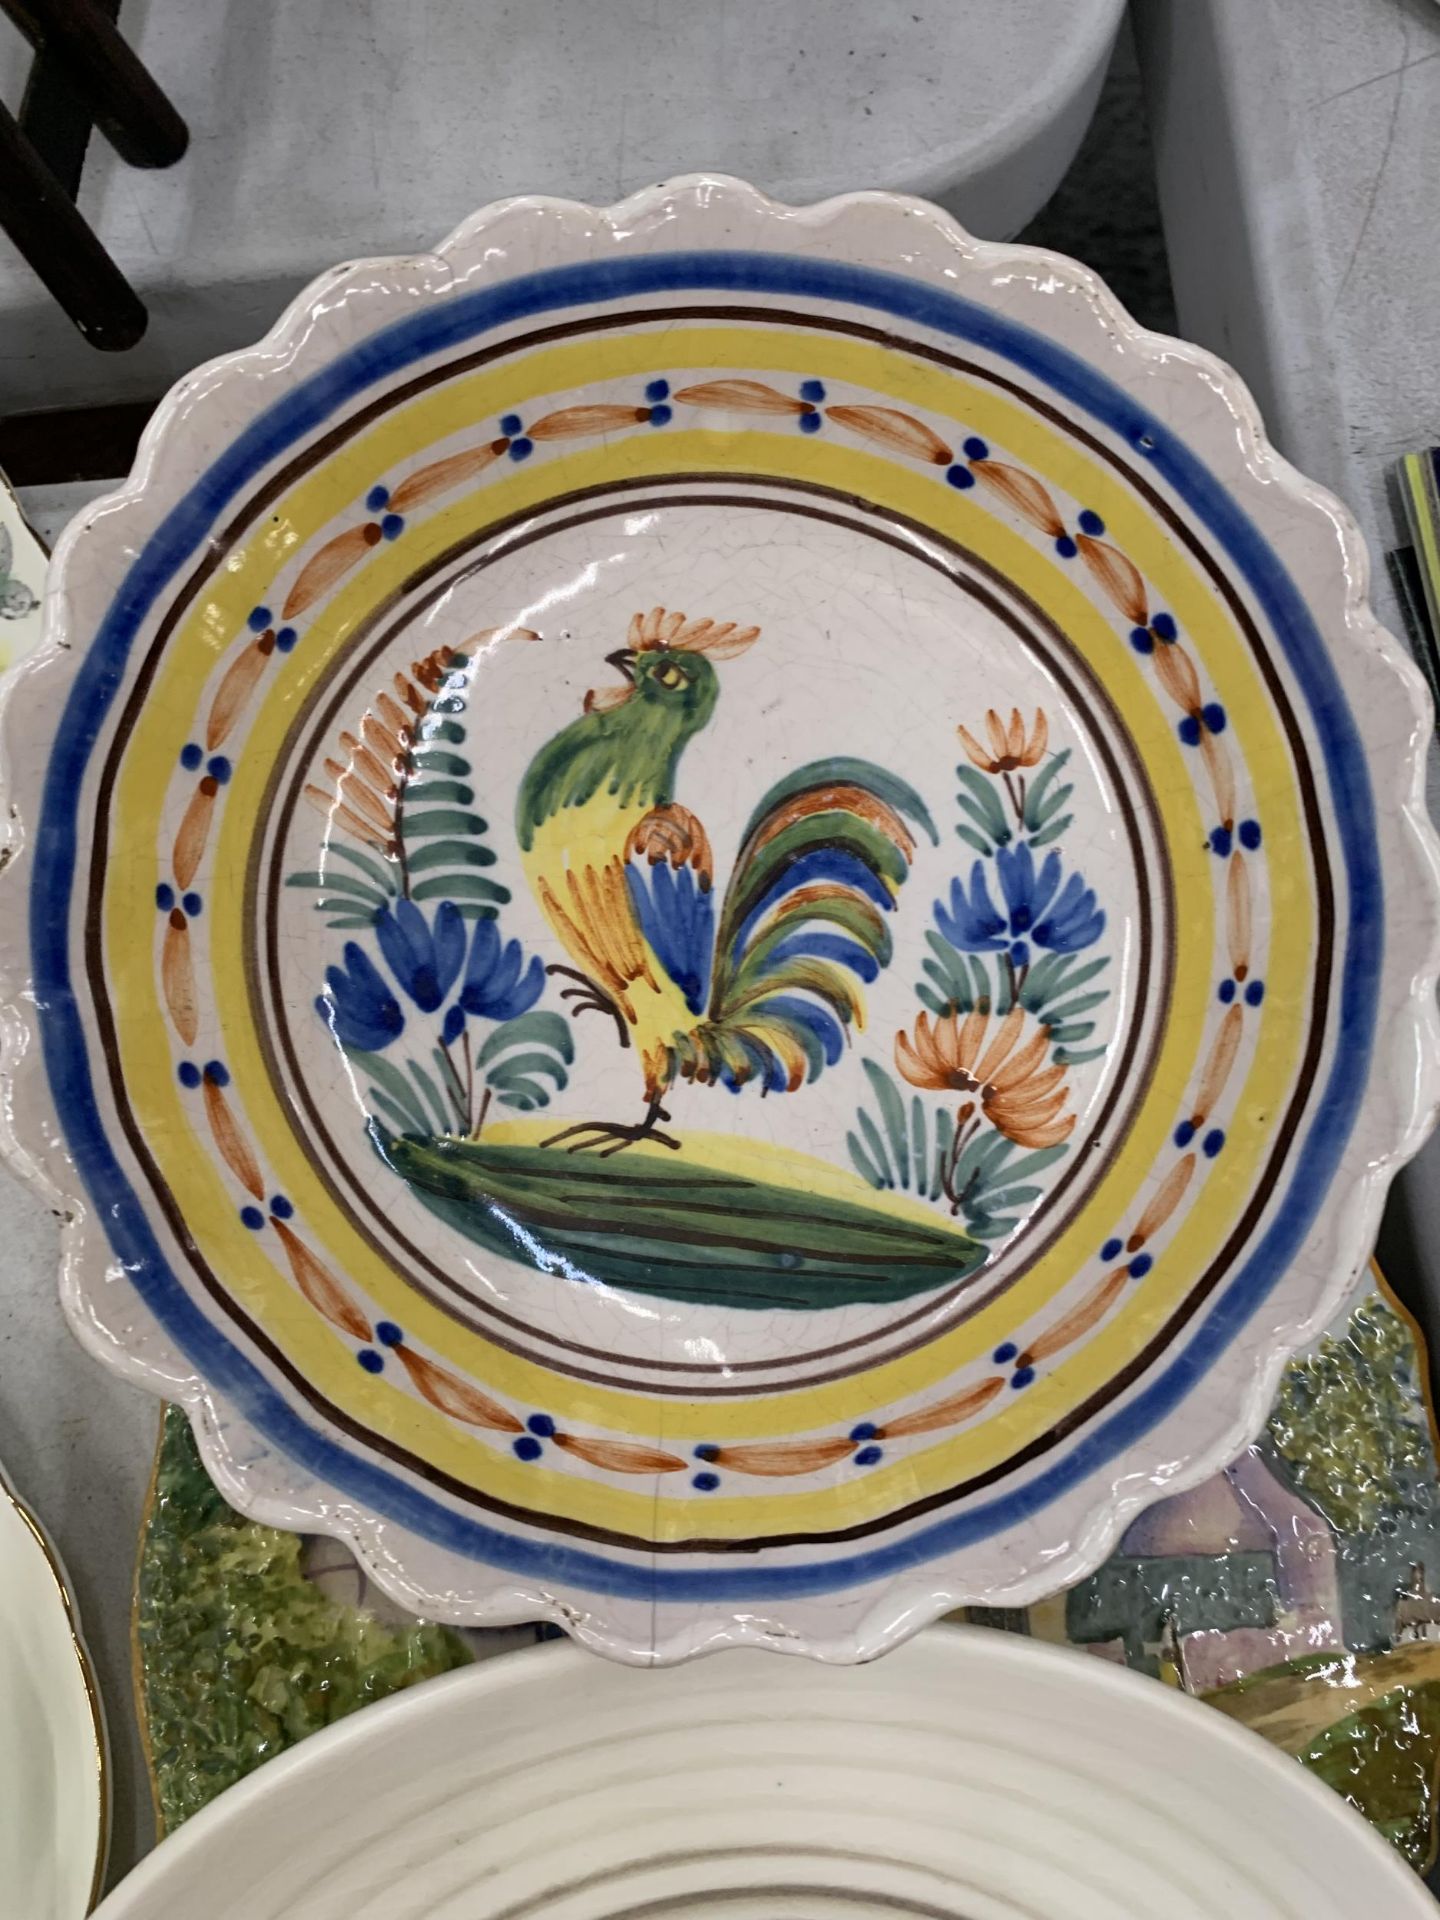 AQUANTITY OF COLLECTABLE PLATES TO INCLUDE ROYAL DOULTON, CABINET PLATES, ETC - Image 3 of 10